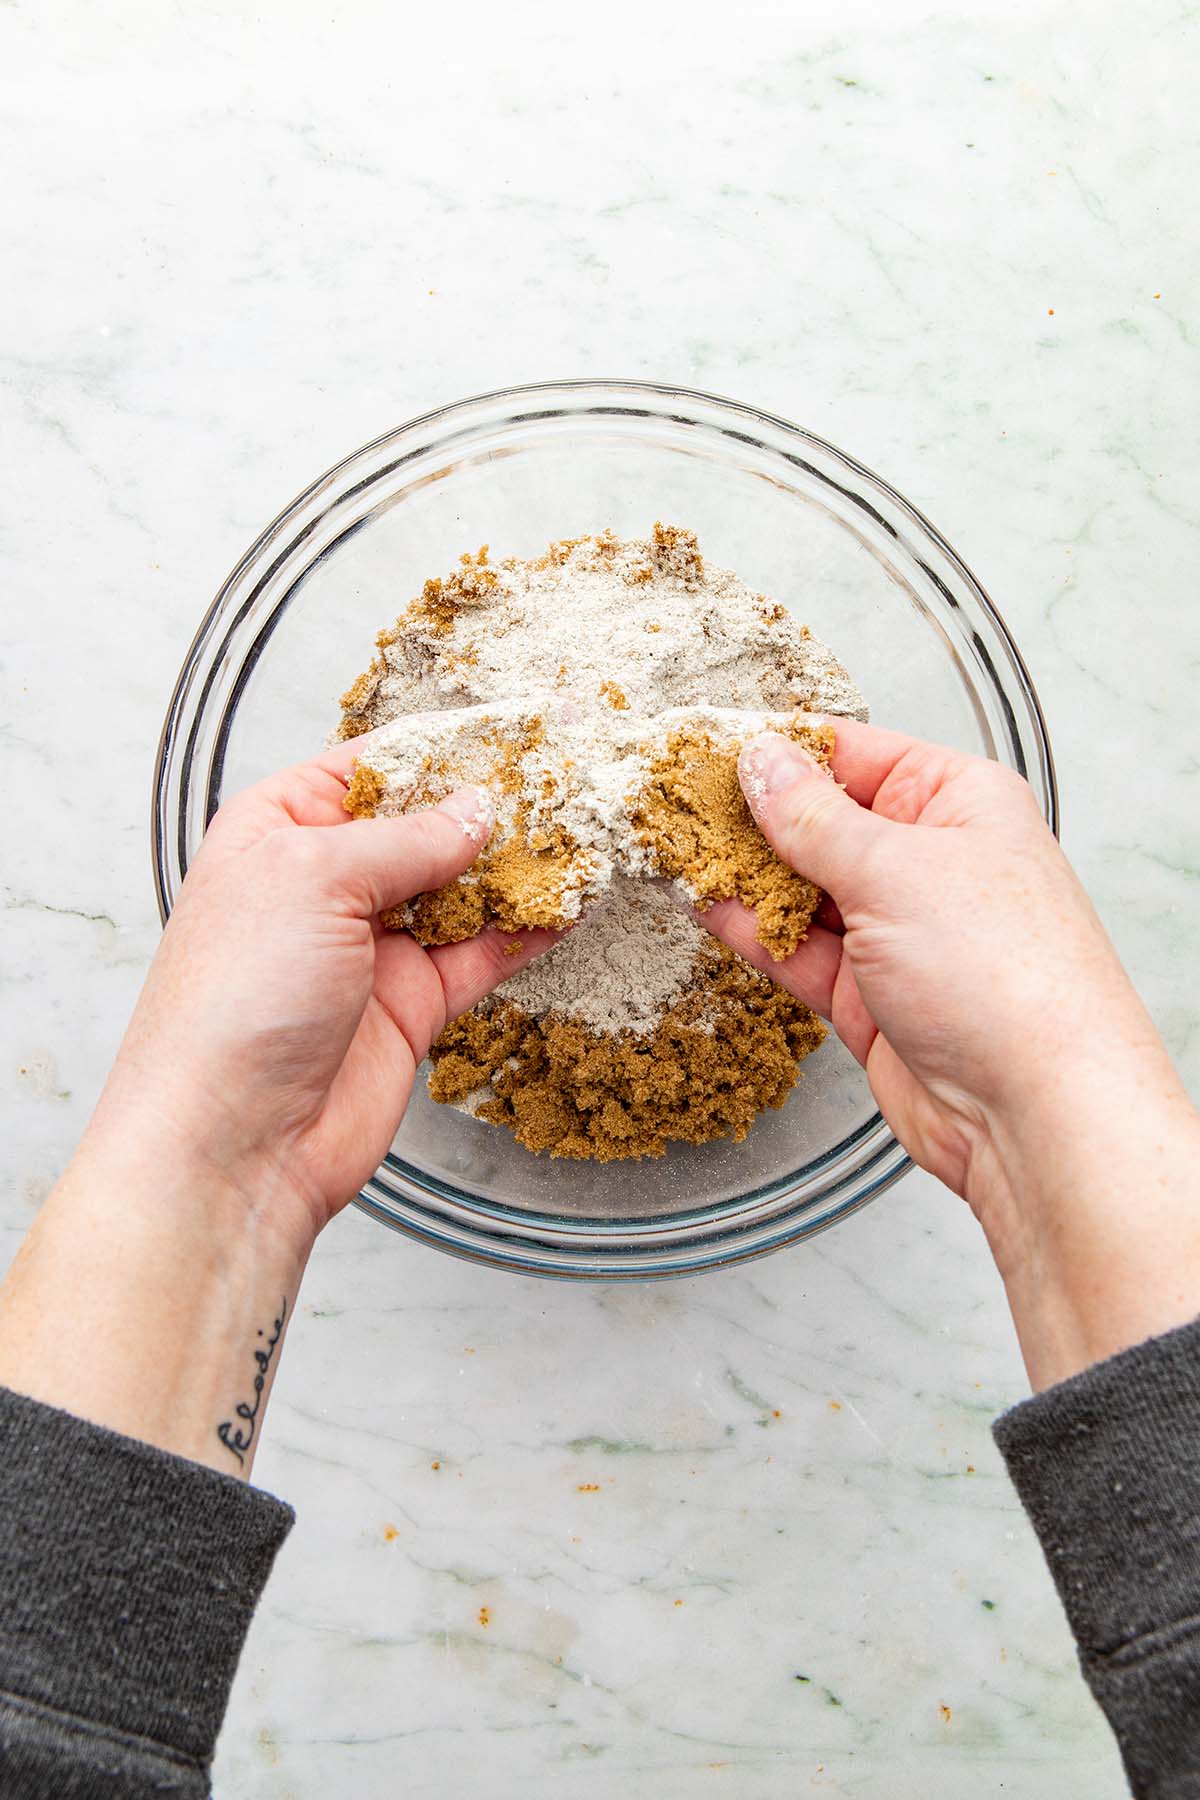 Hands rubbing together dry crumble topping ingredients.